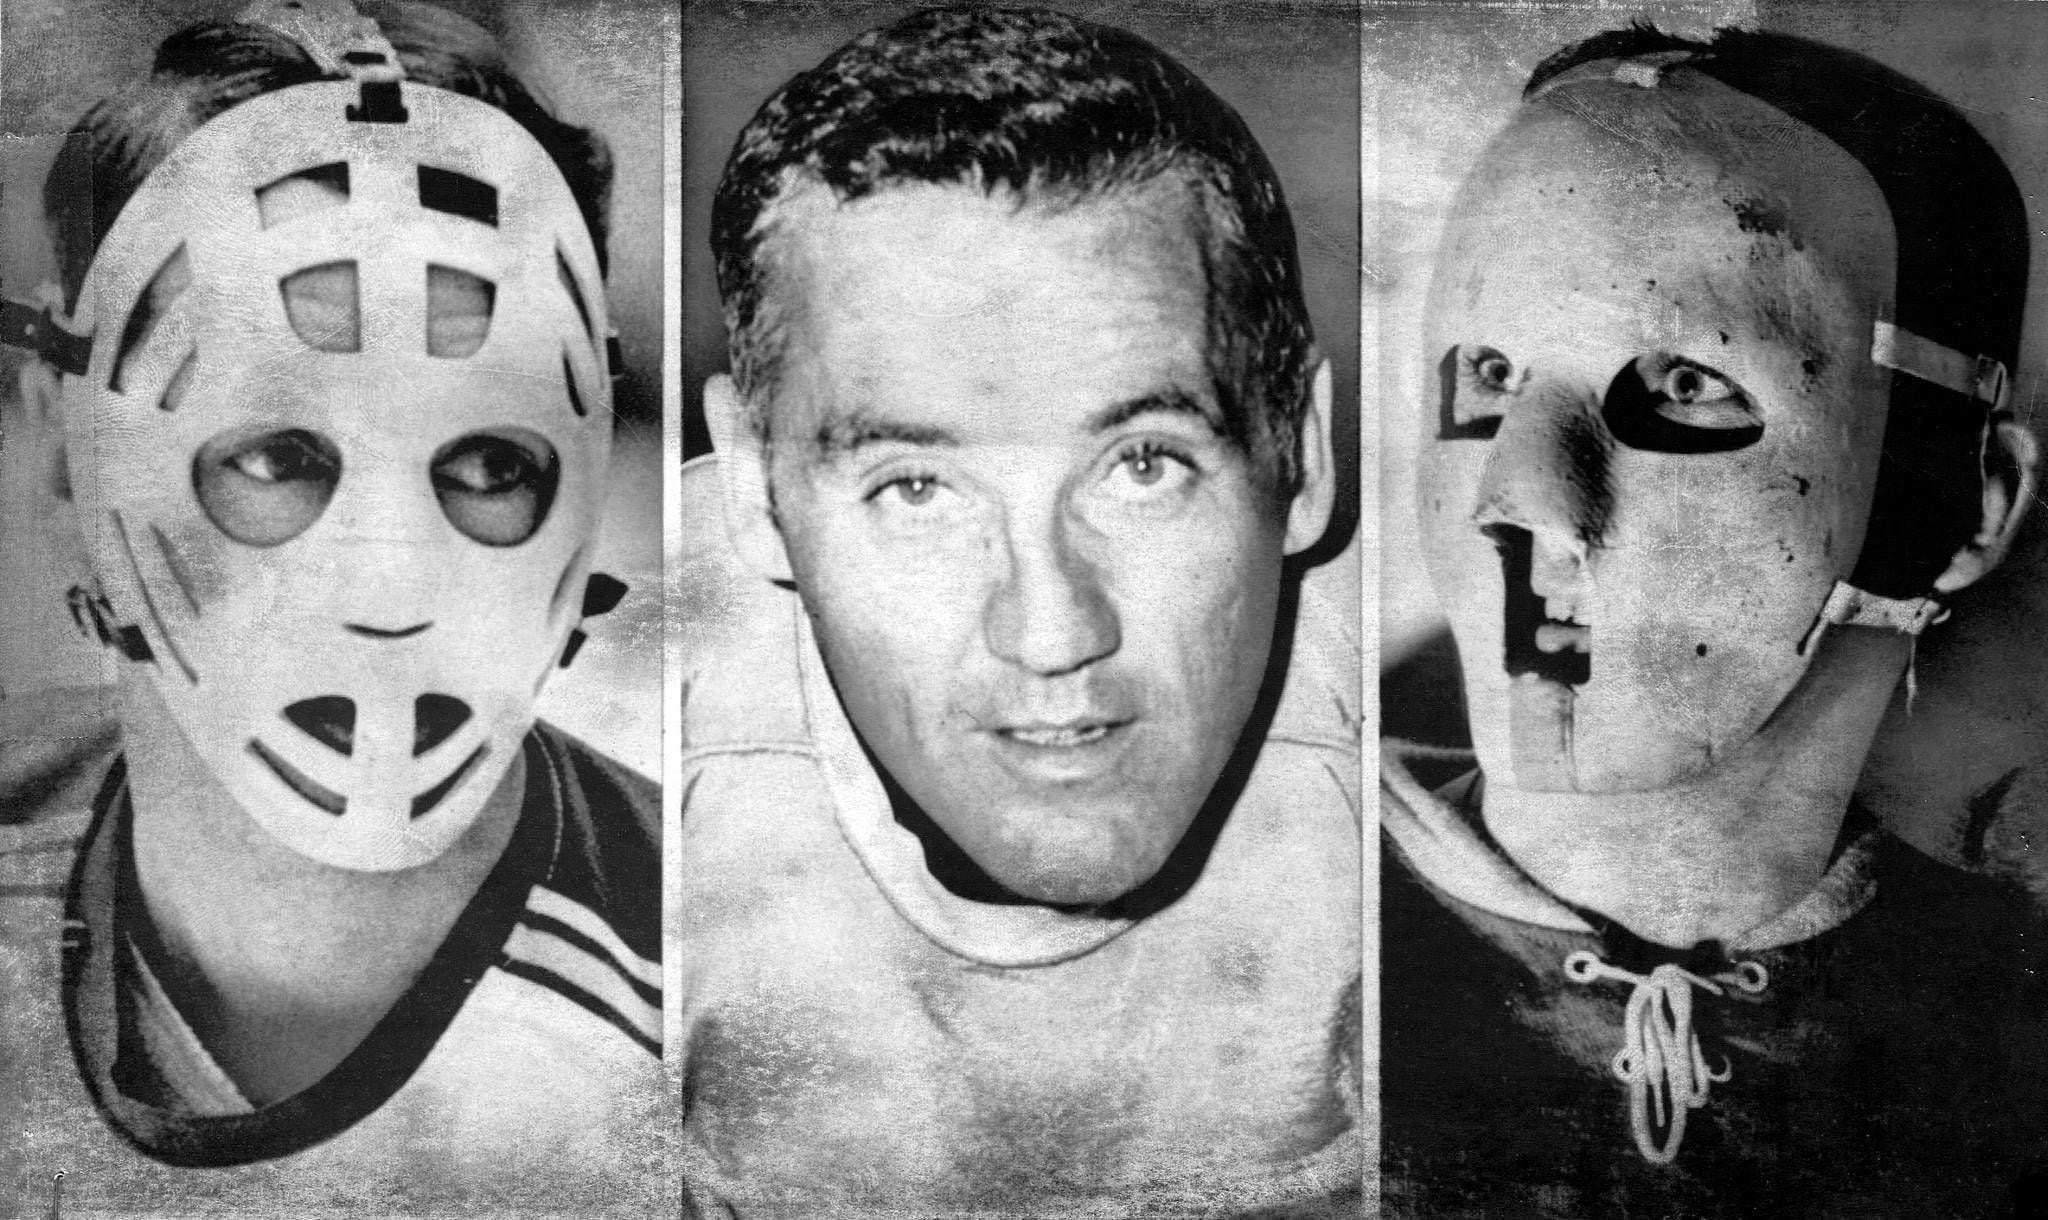 A History of the Evolution of Goalie Masks in Hockey